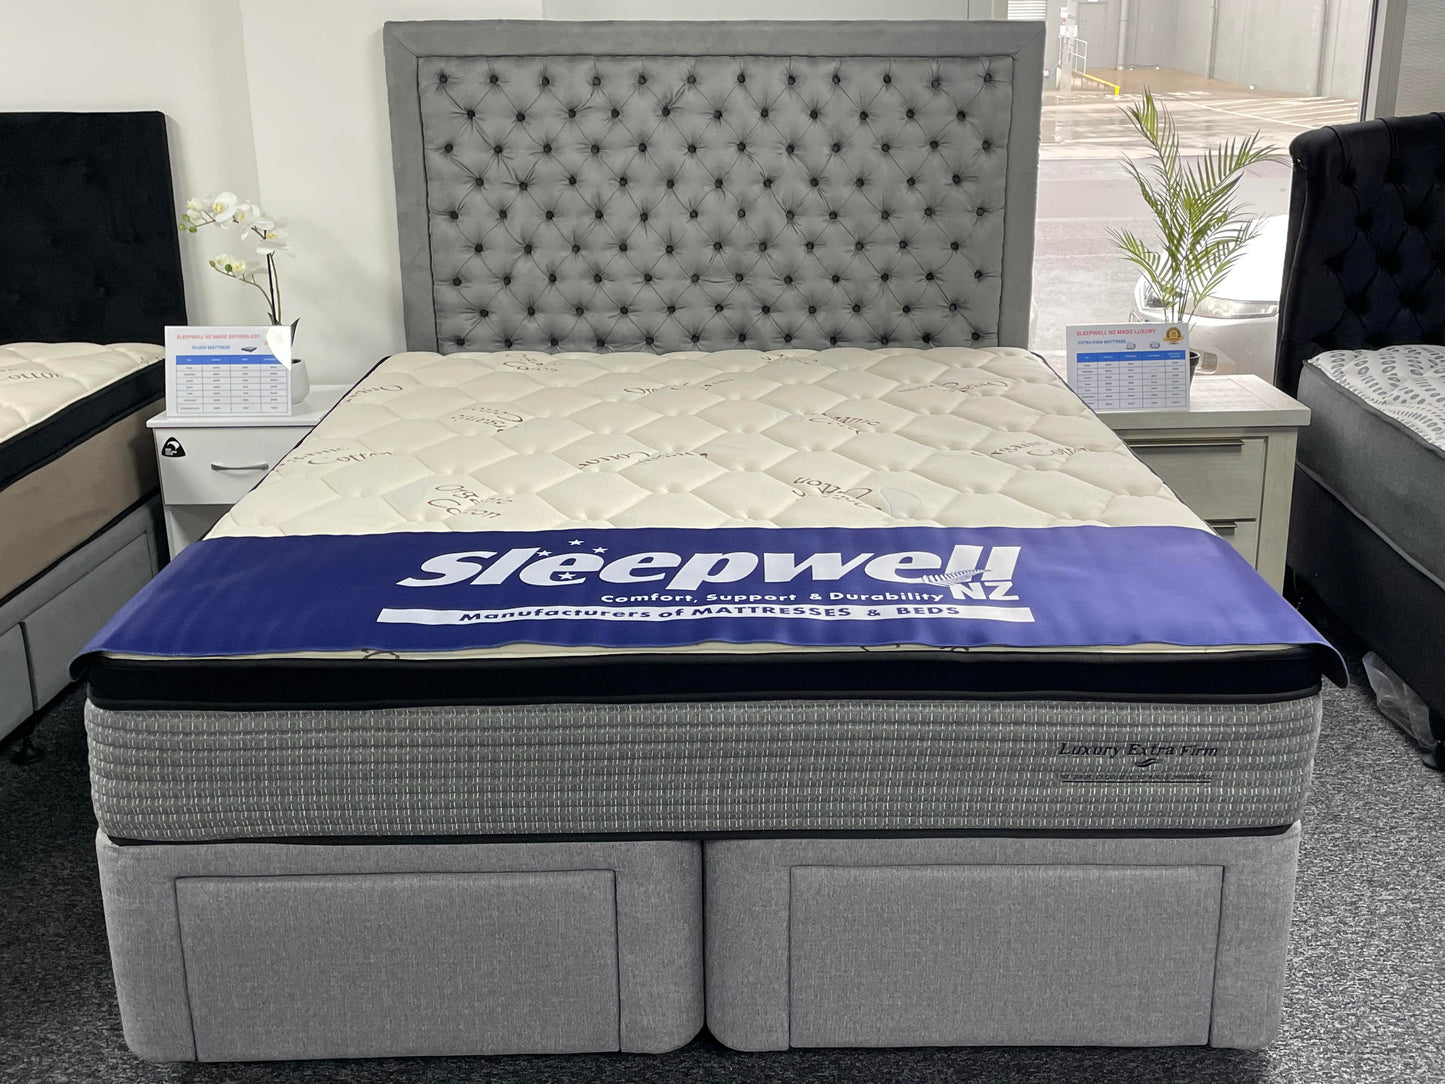 Sleepwell Luxury Extra Firm Mattress with Two Deep Drawer Base